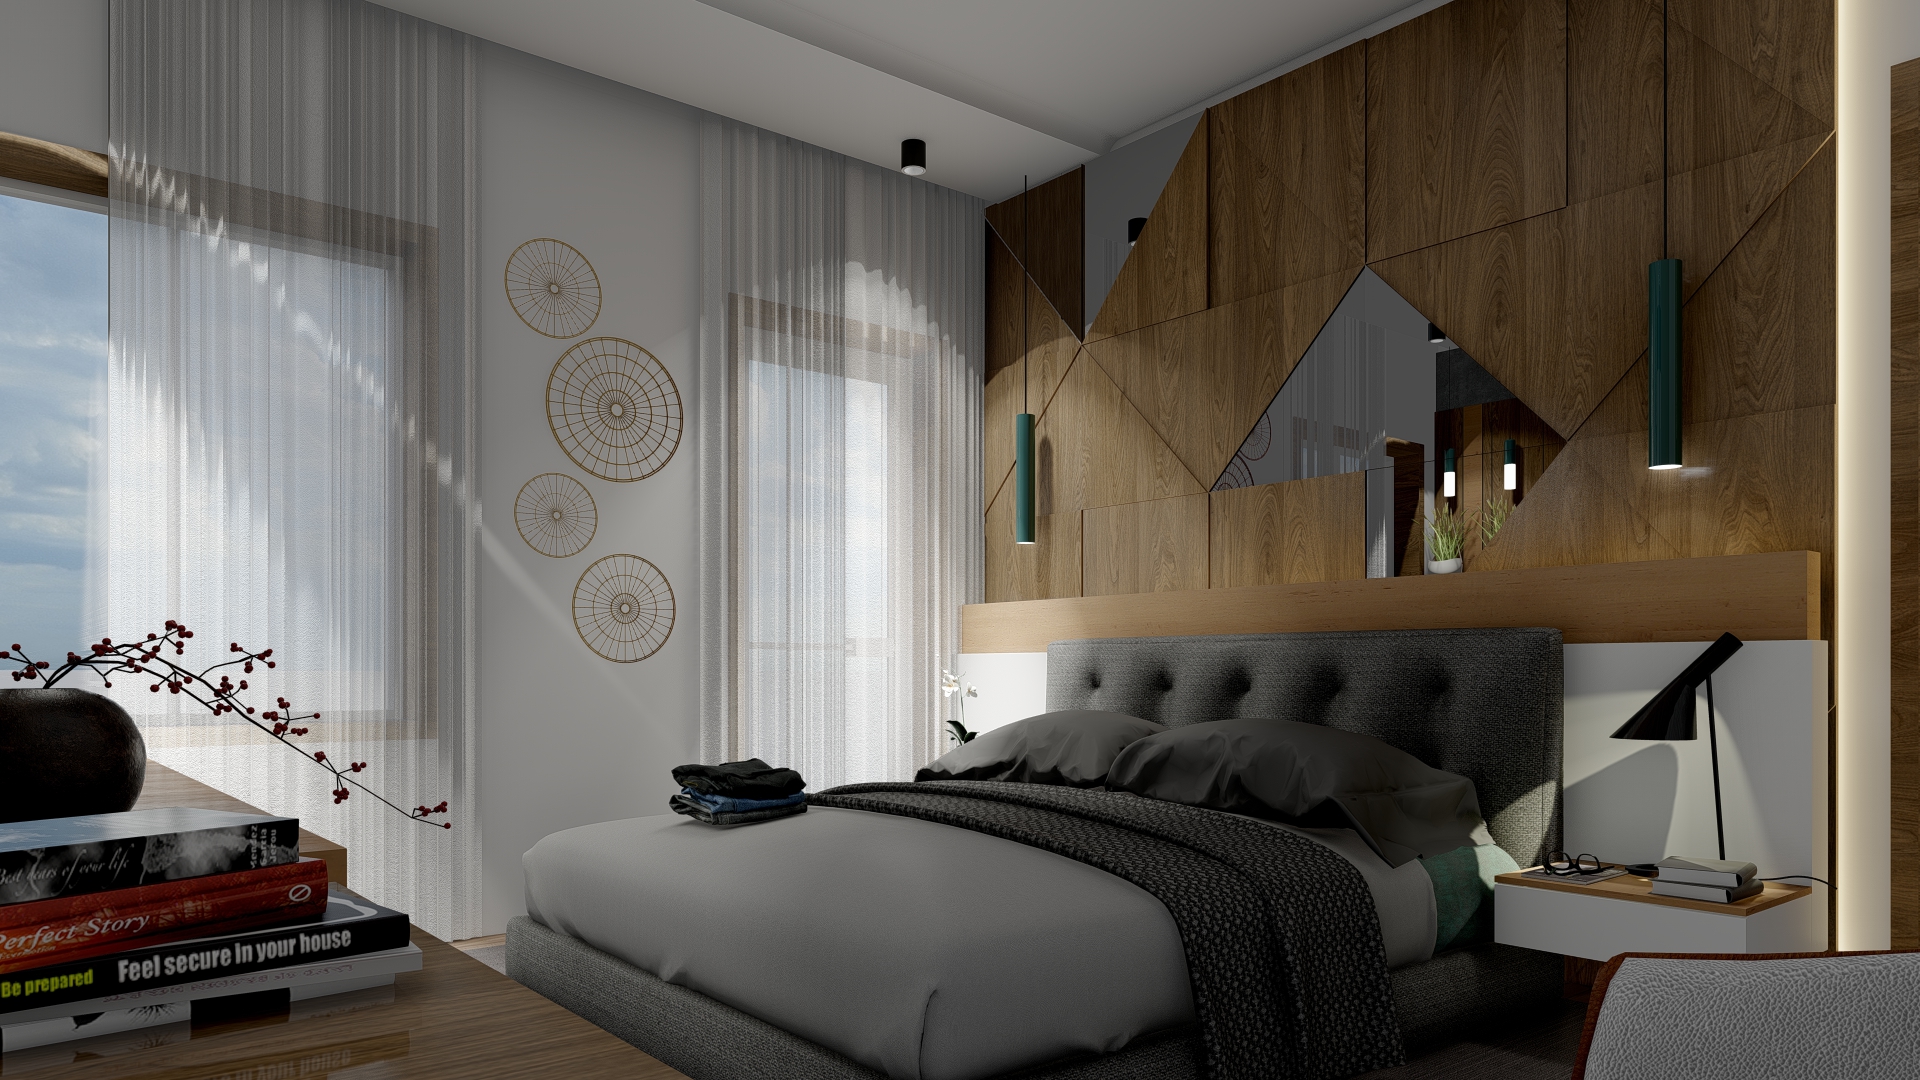 Bedroom Design With Wall Accents